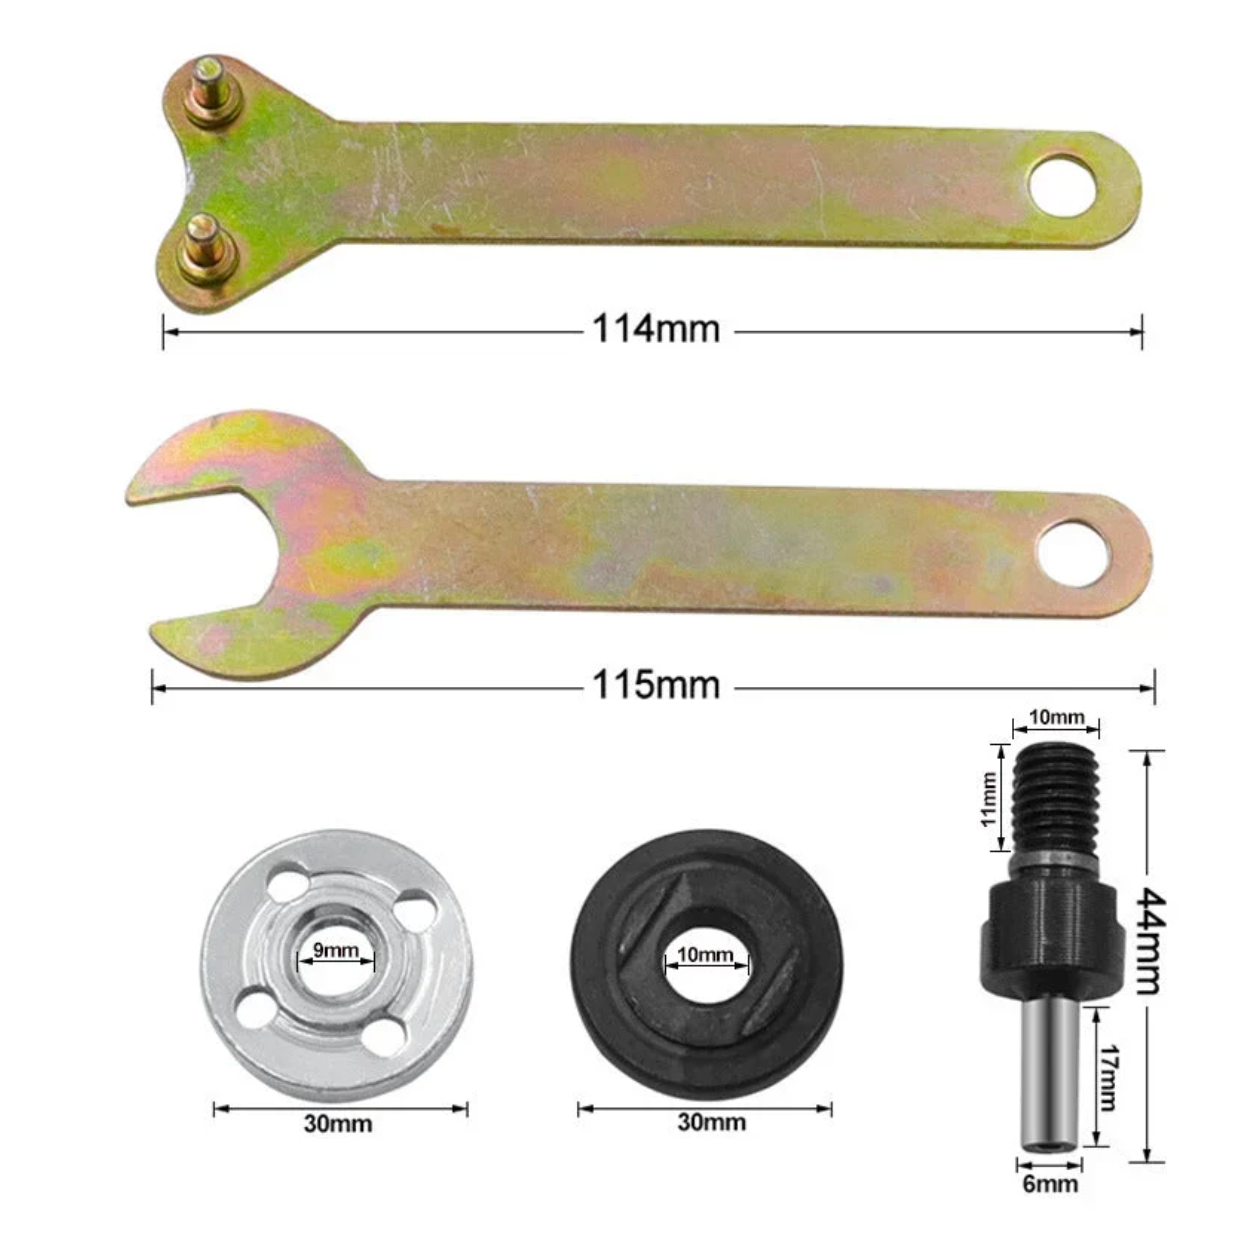 Electric drill angle grinder connecting rod set